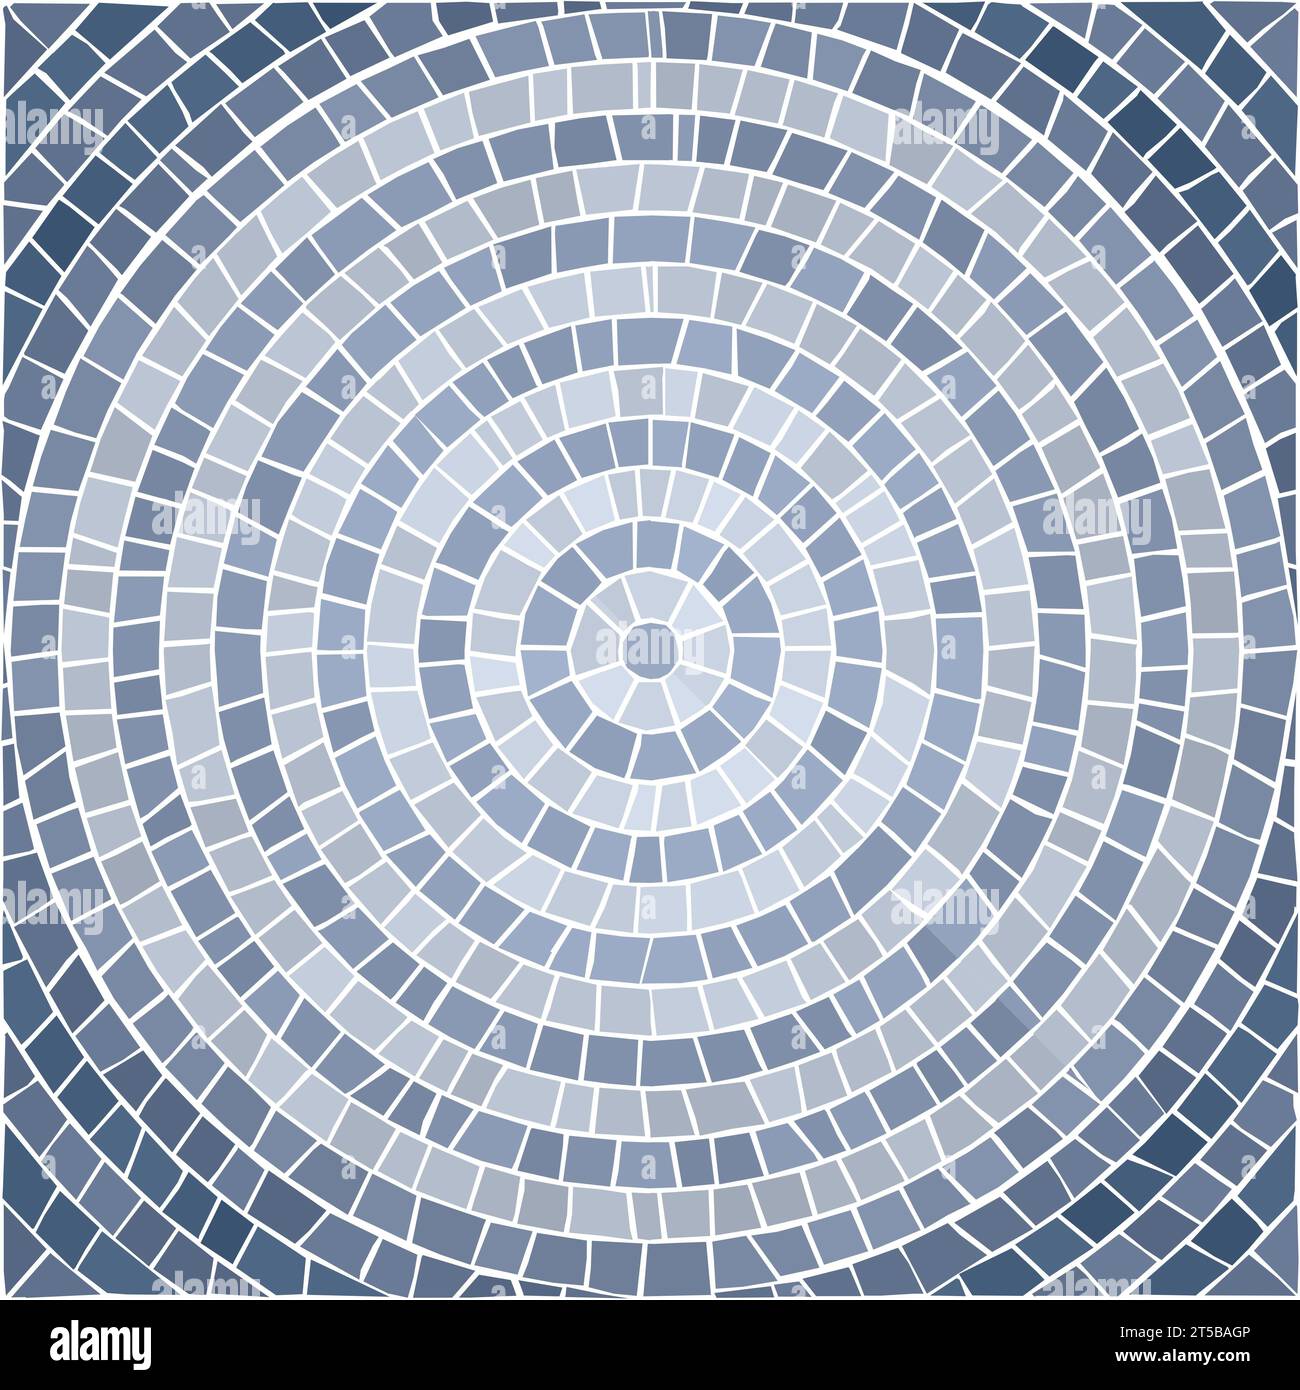 Mosaic tile vector template, seamless pattern Stock Photo